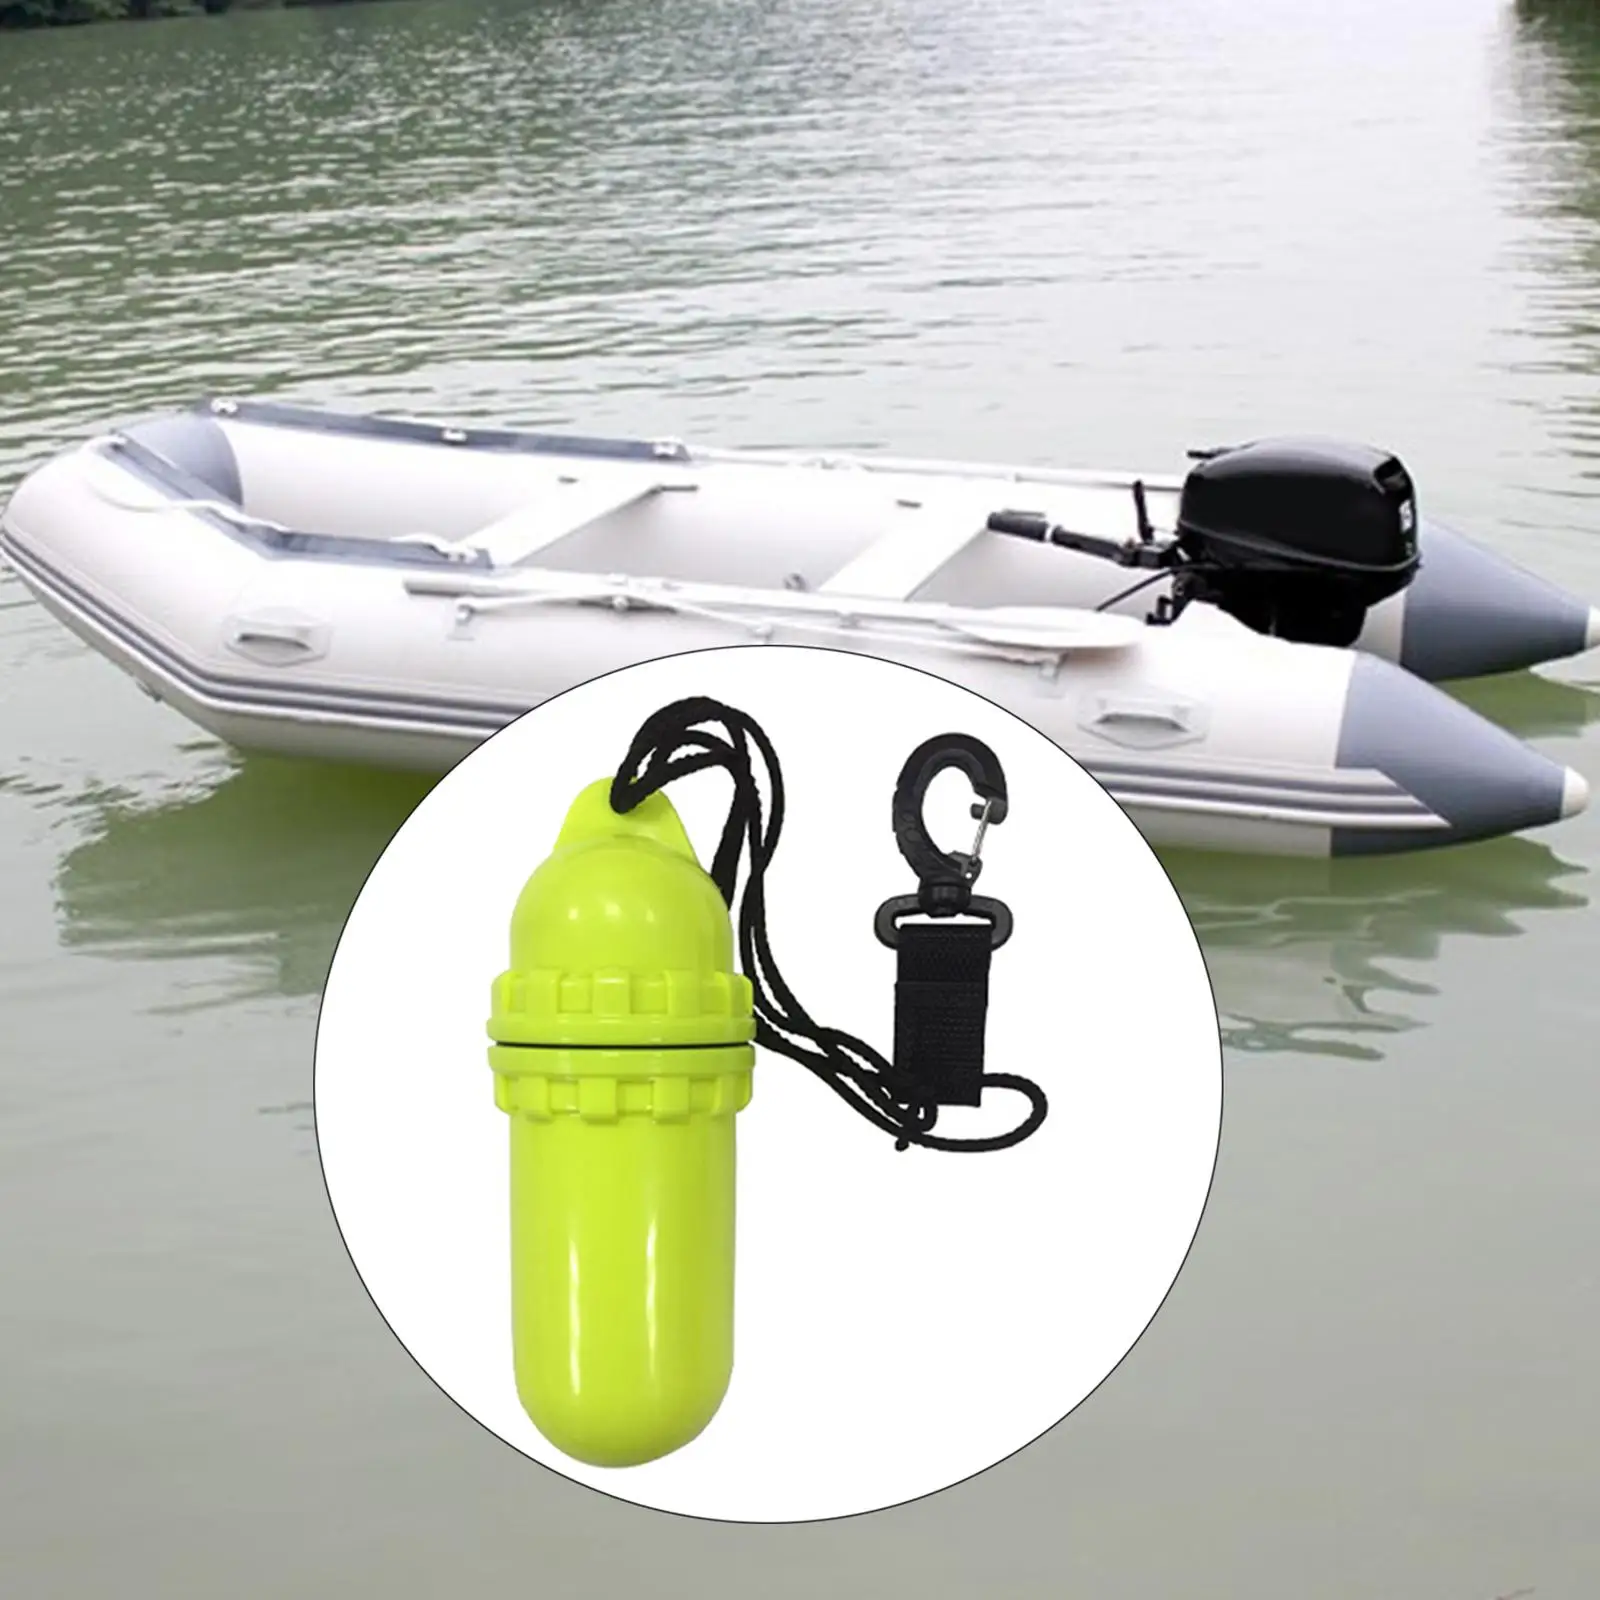 Scuba Diving Kayaking Waterproof Dry Box Gear Accessories Container Case & Rope Clip For Money ID Cards License Outdoor Sports